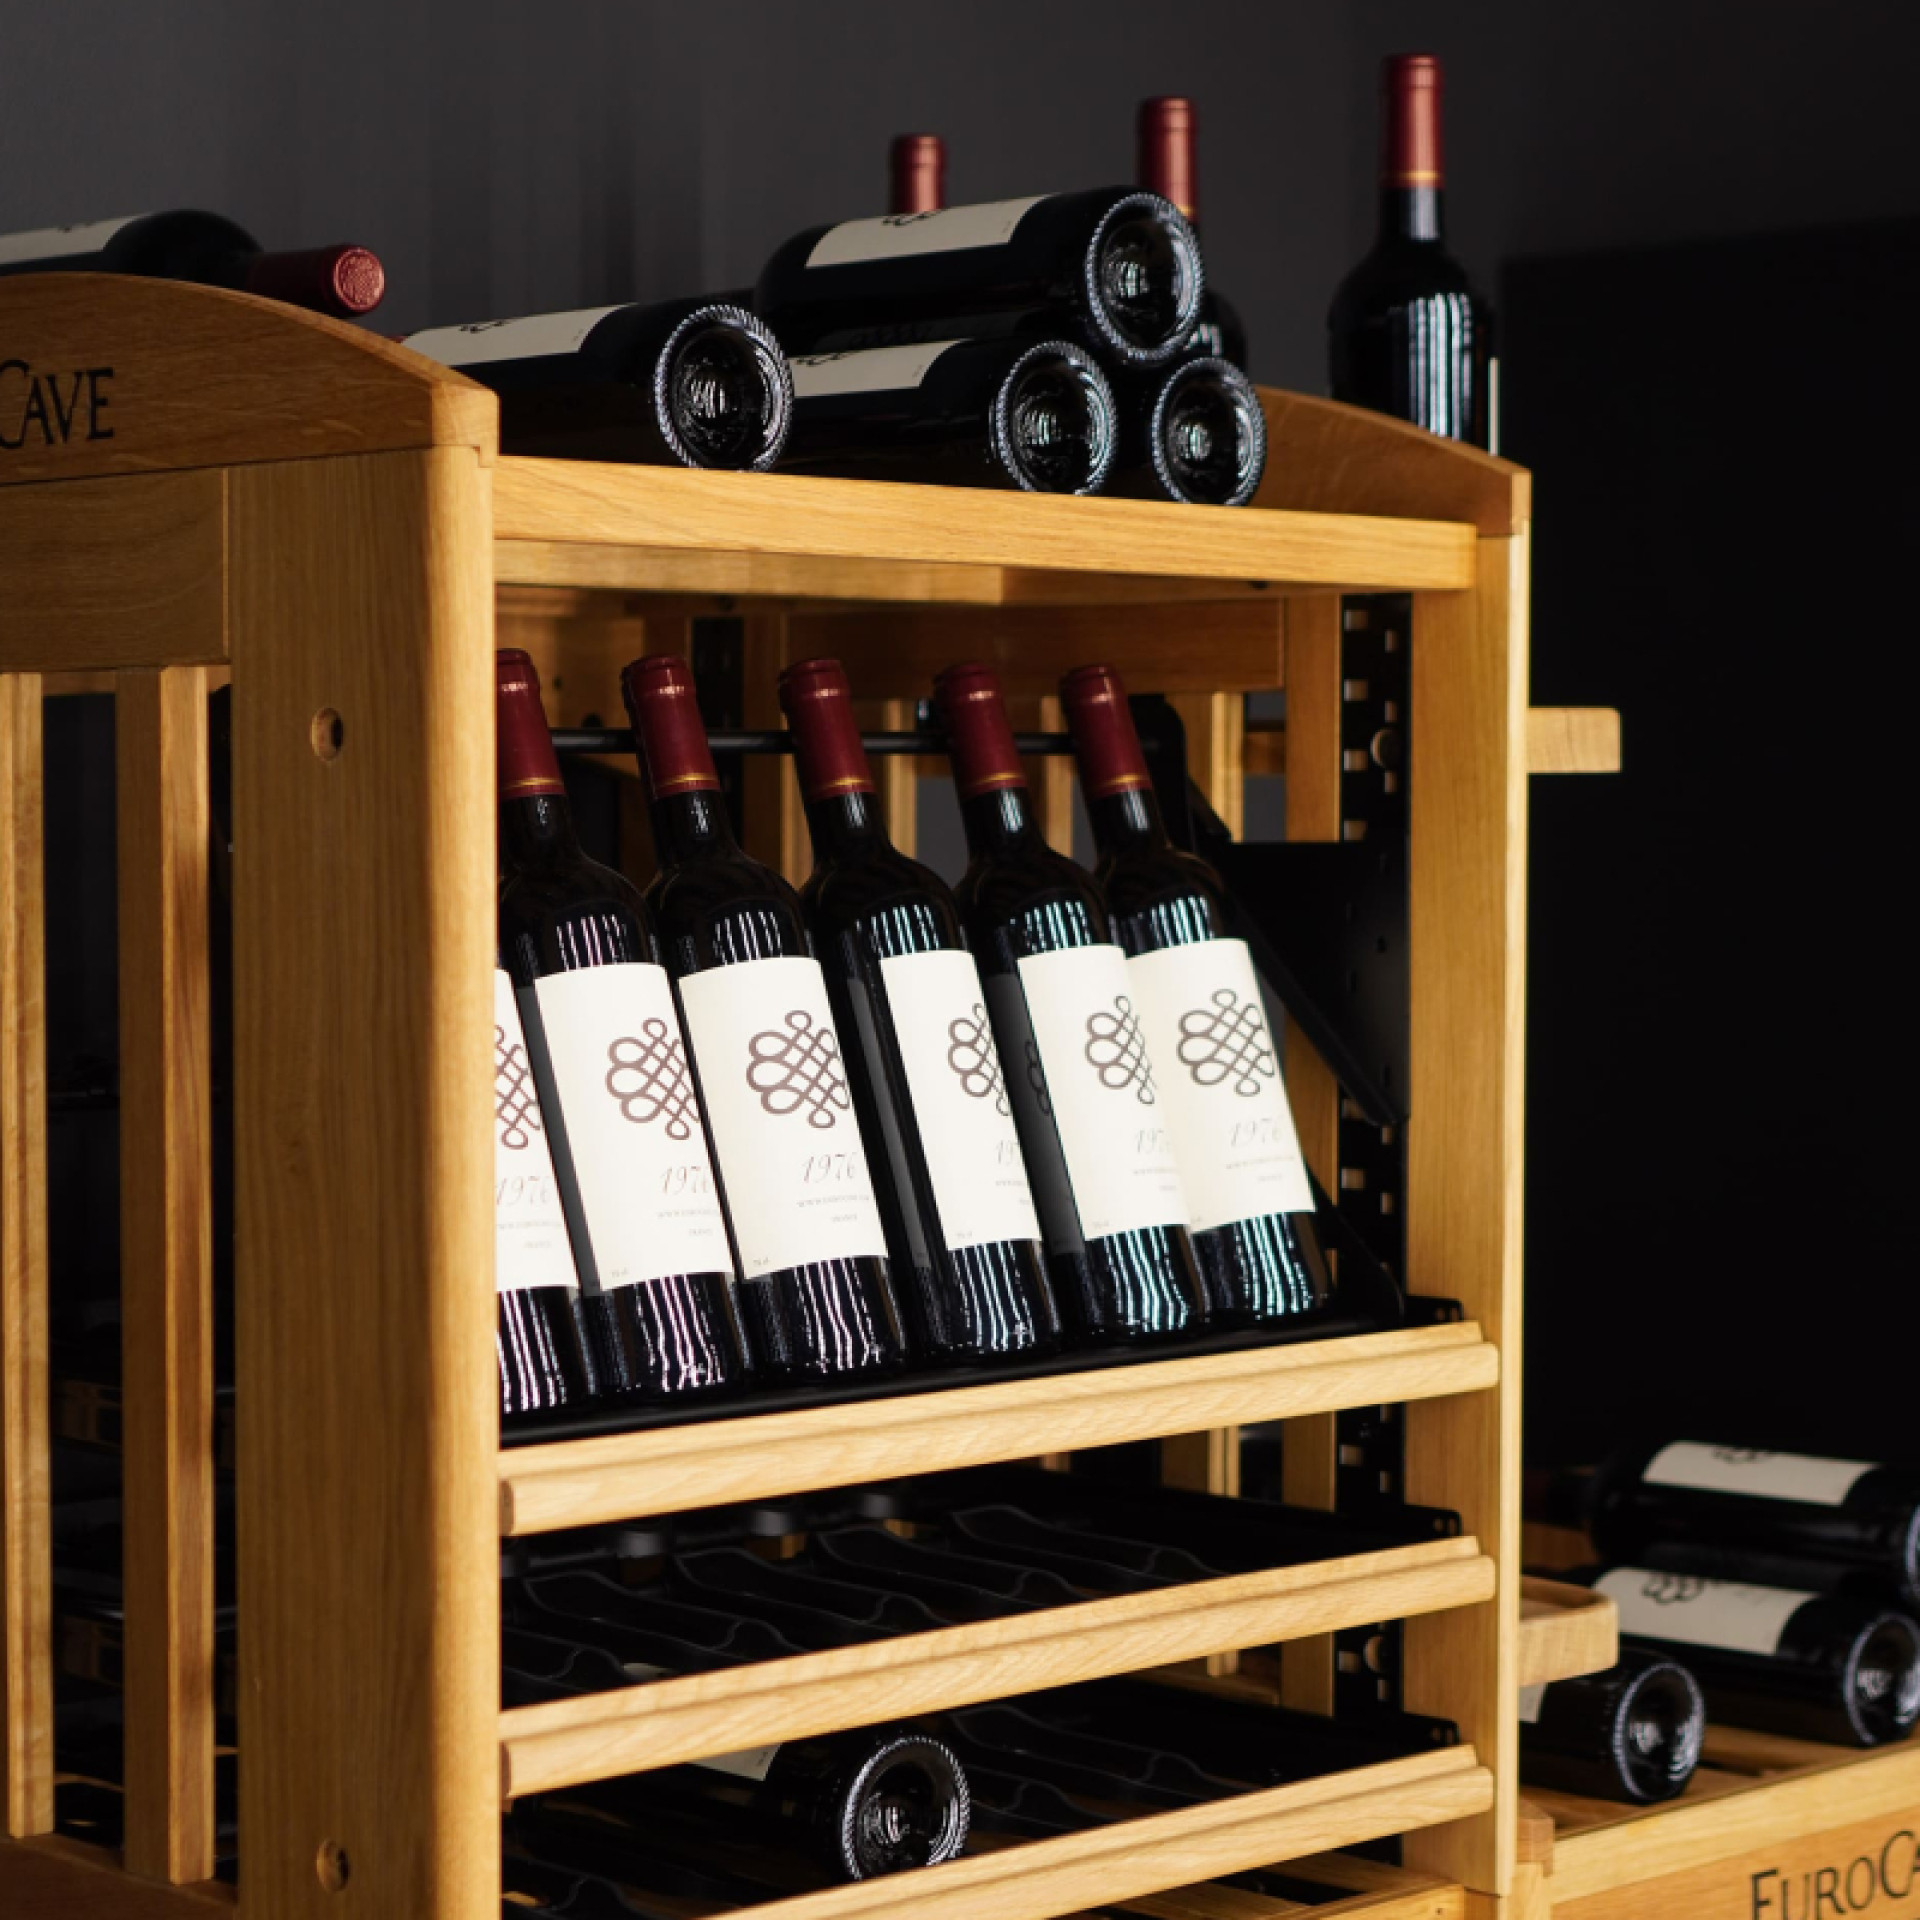 wine-storage-rack-warmth-of-wood-solidity-of-solid-wood-numerous-presentation-options-eurocave-modulotheque.jpg